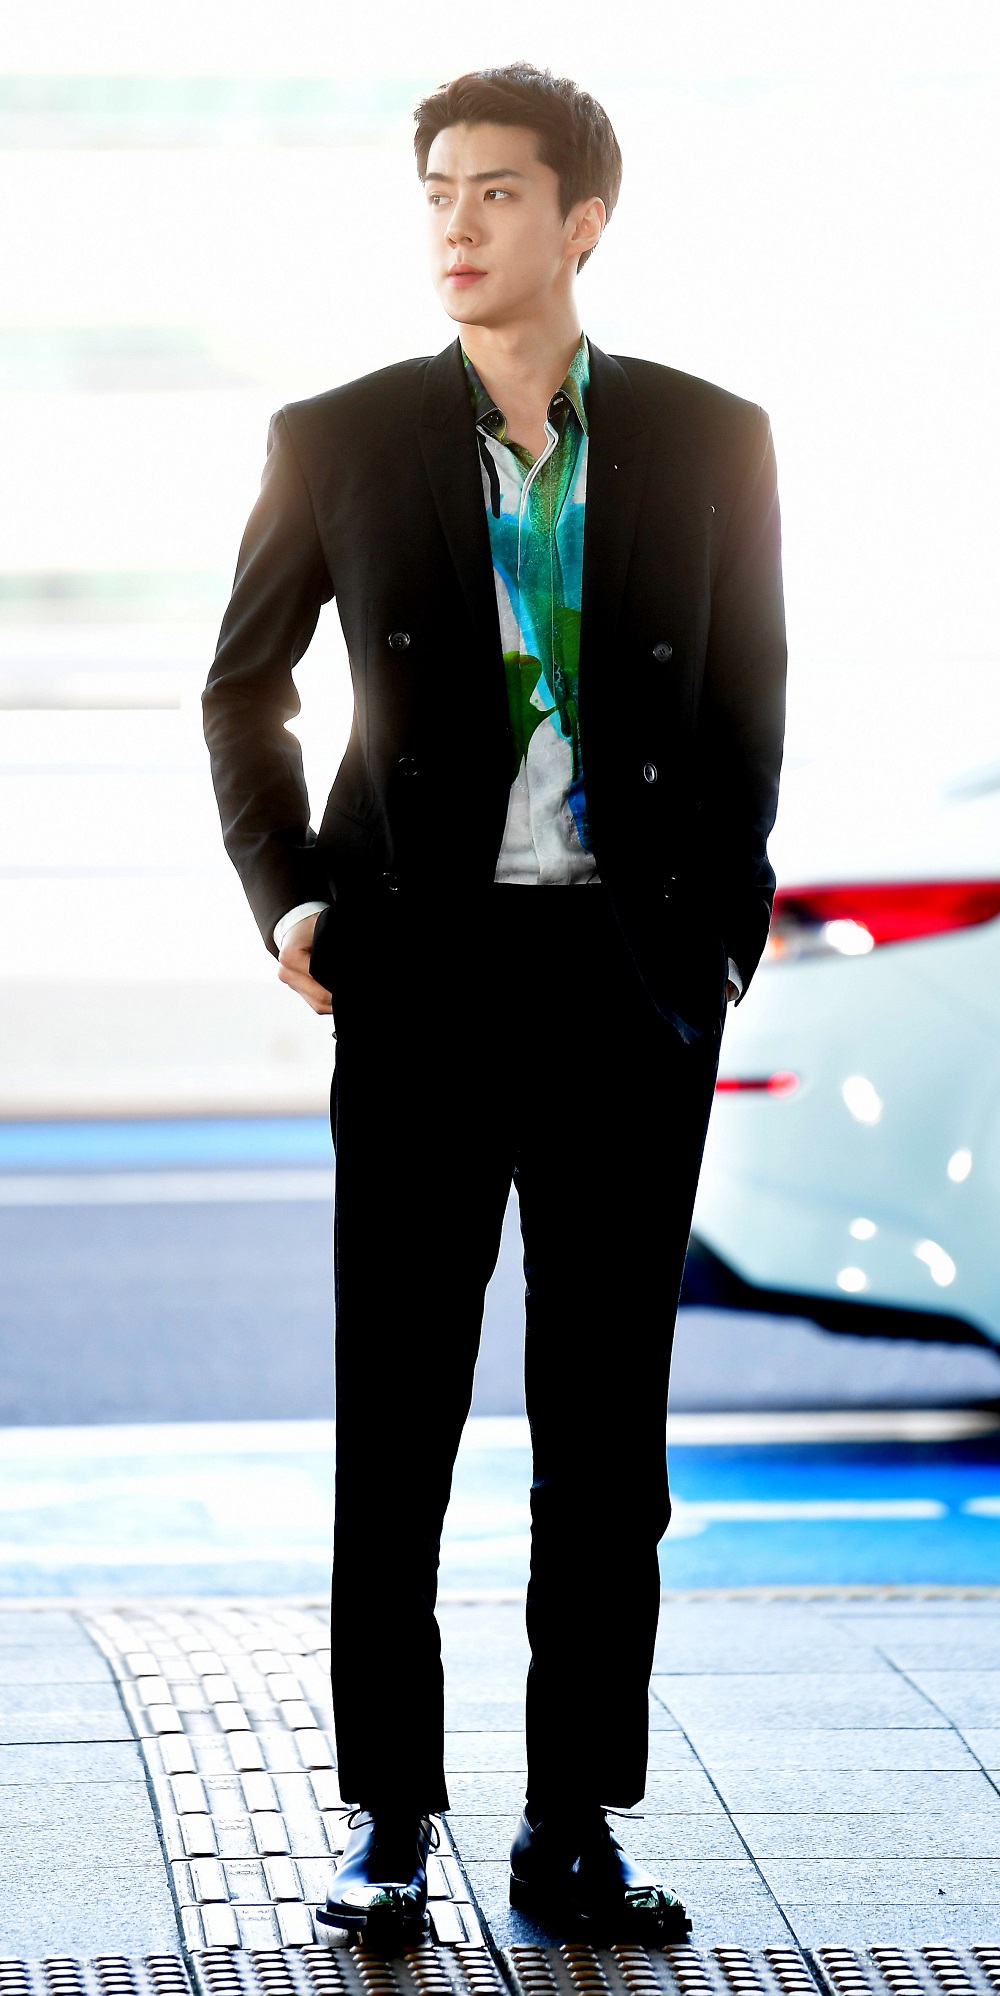 On the afternoon of the 15th, group EXO Sehun left the country through Incheon International Airport to attend the 2020 Winter Fashion Show of Beluti in France Paris.On this day, Sehun attracted the attention of viewers by showing sophisticated all-black suit style.The graphic silk shirt gave points and matched the metal detail lace-up shoes to add a stylish look.Both costumes, belts and Oxford shoes worn by Sehun are known as France luxury brand Beluti products.Sehun, meanwhile, will attend the Beluti 2020 Winter Fashion Show in France Paris on January 21.